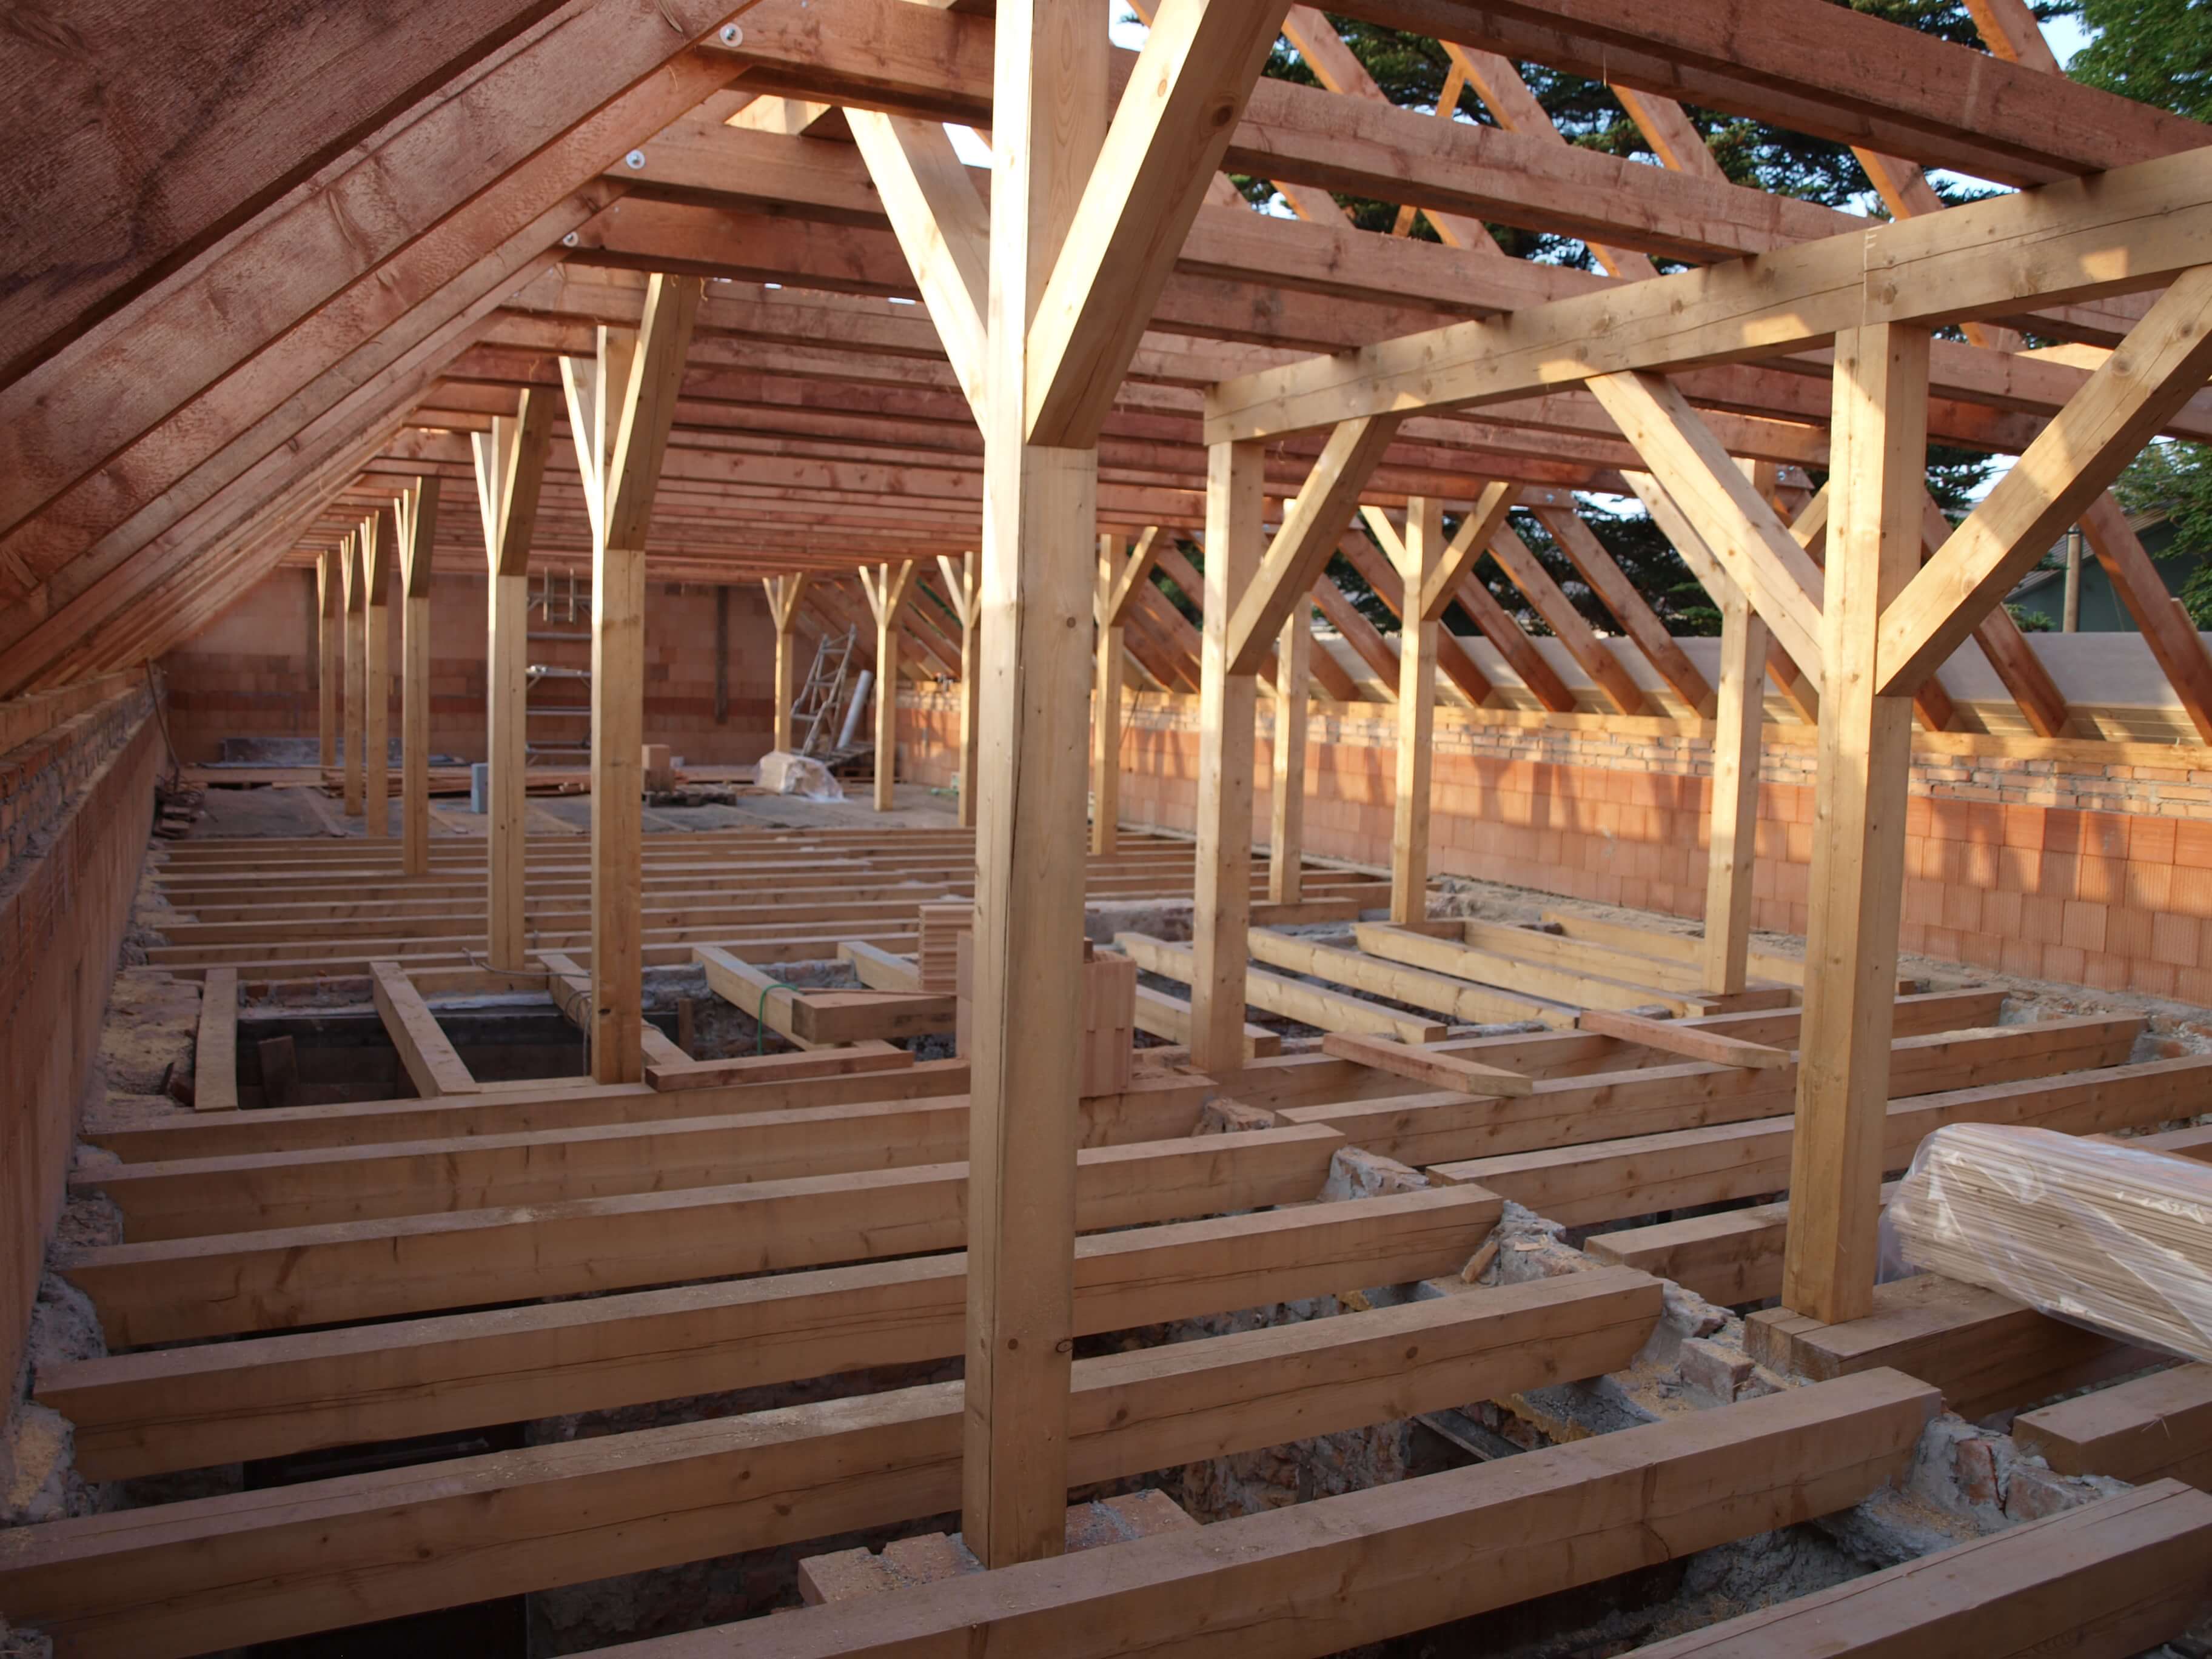 Impregnated wood - the starting point for quality roofing 